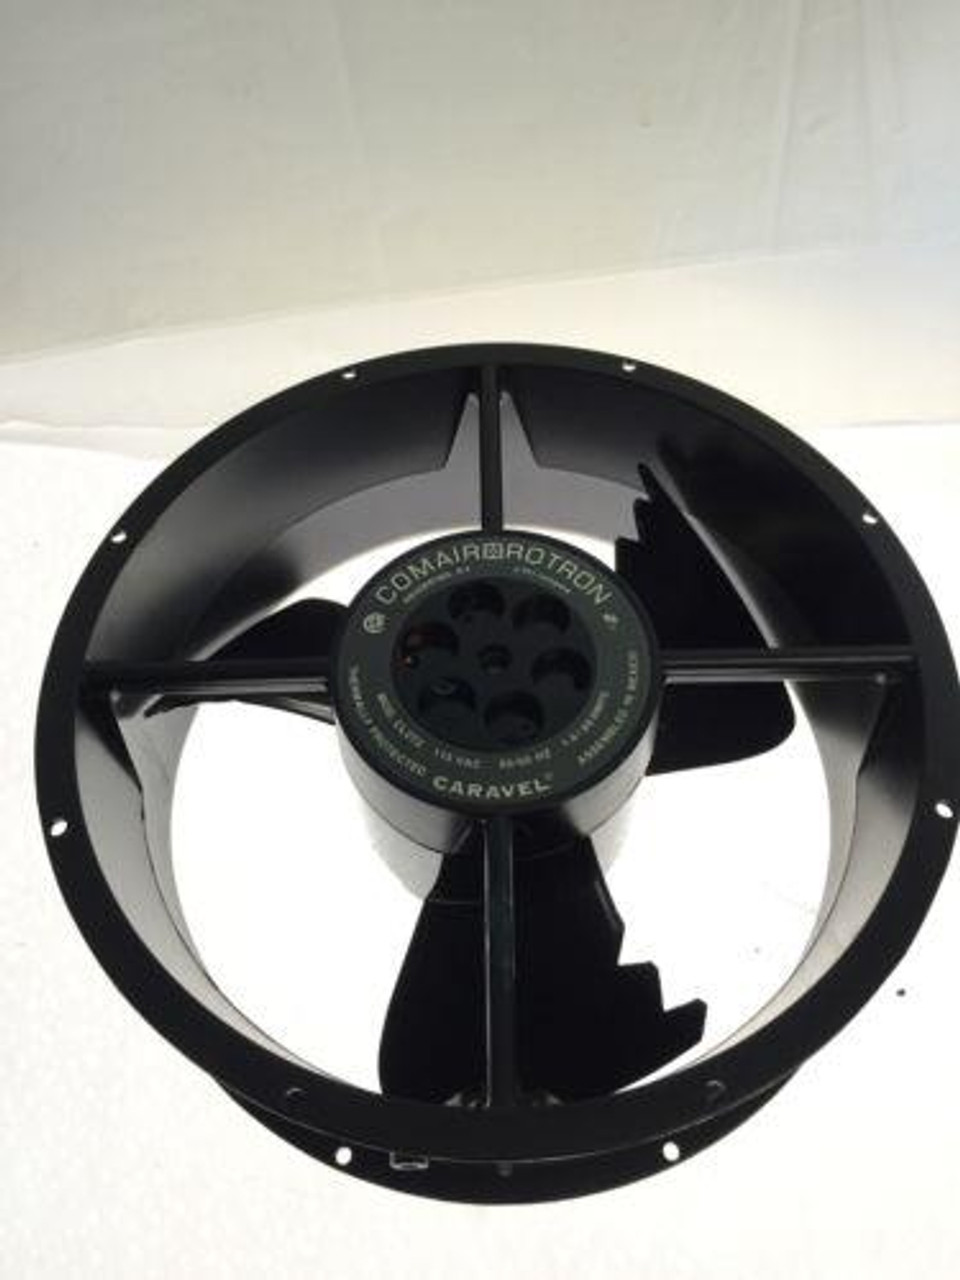 CL2T2 Comair Rotron 525cfm 1.0 88 Amps 115v Ac Axial Fan 3.5 X 10 Inches